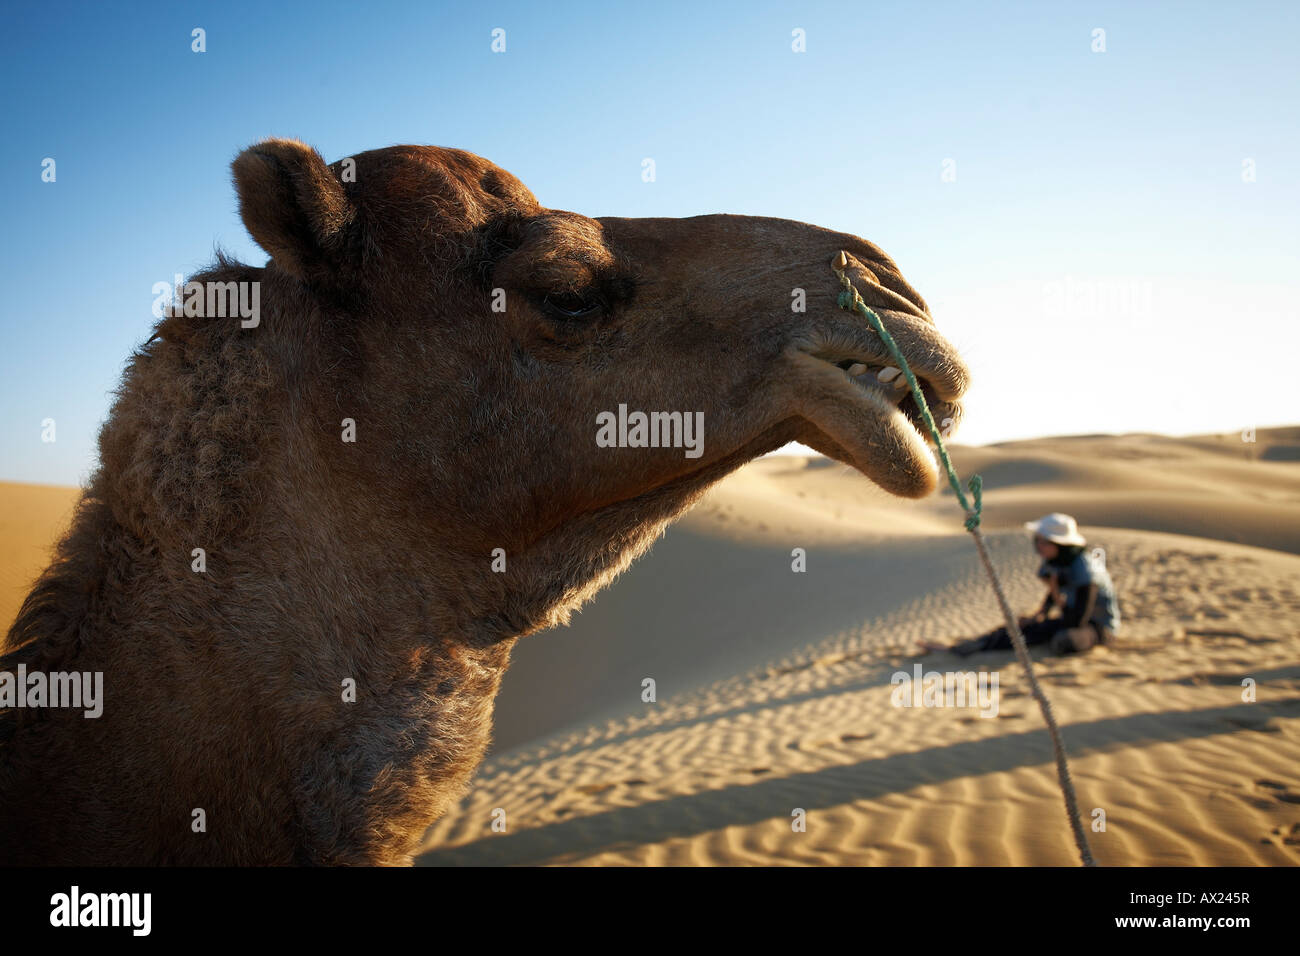 Close-up camel profile in foreground with a person sitting on sand dunes in the background. Stock Photo